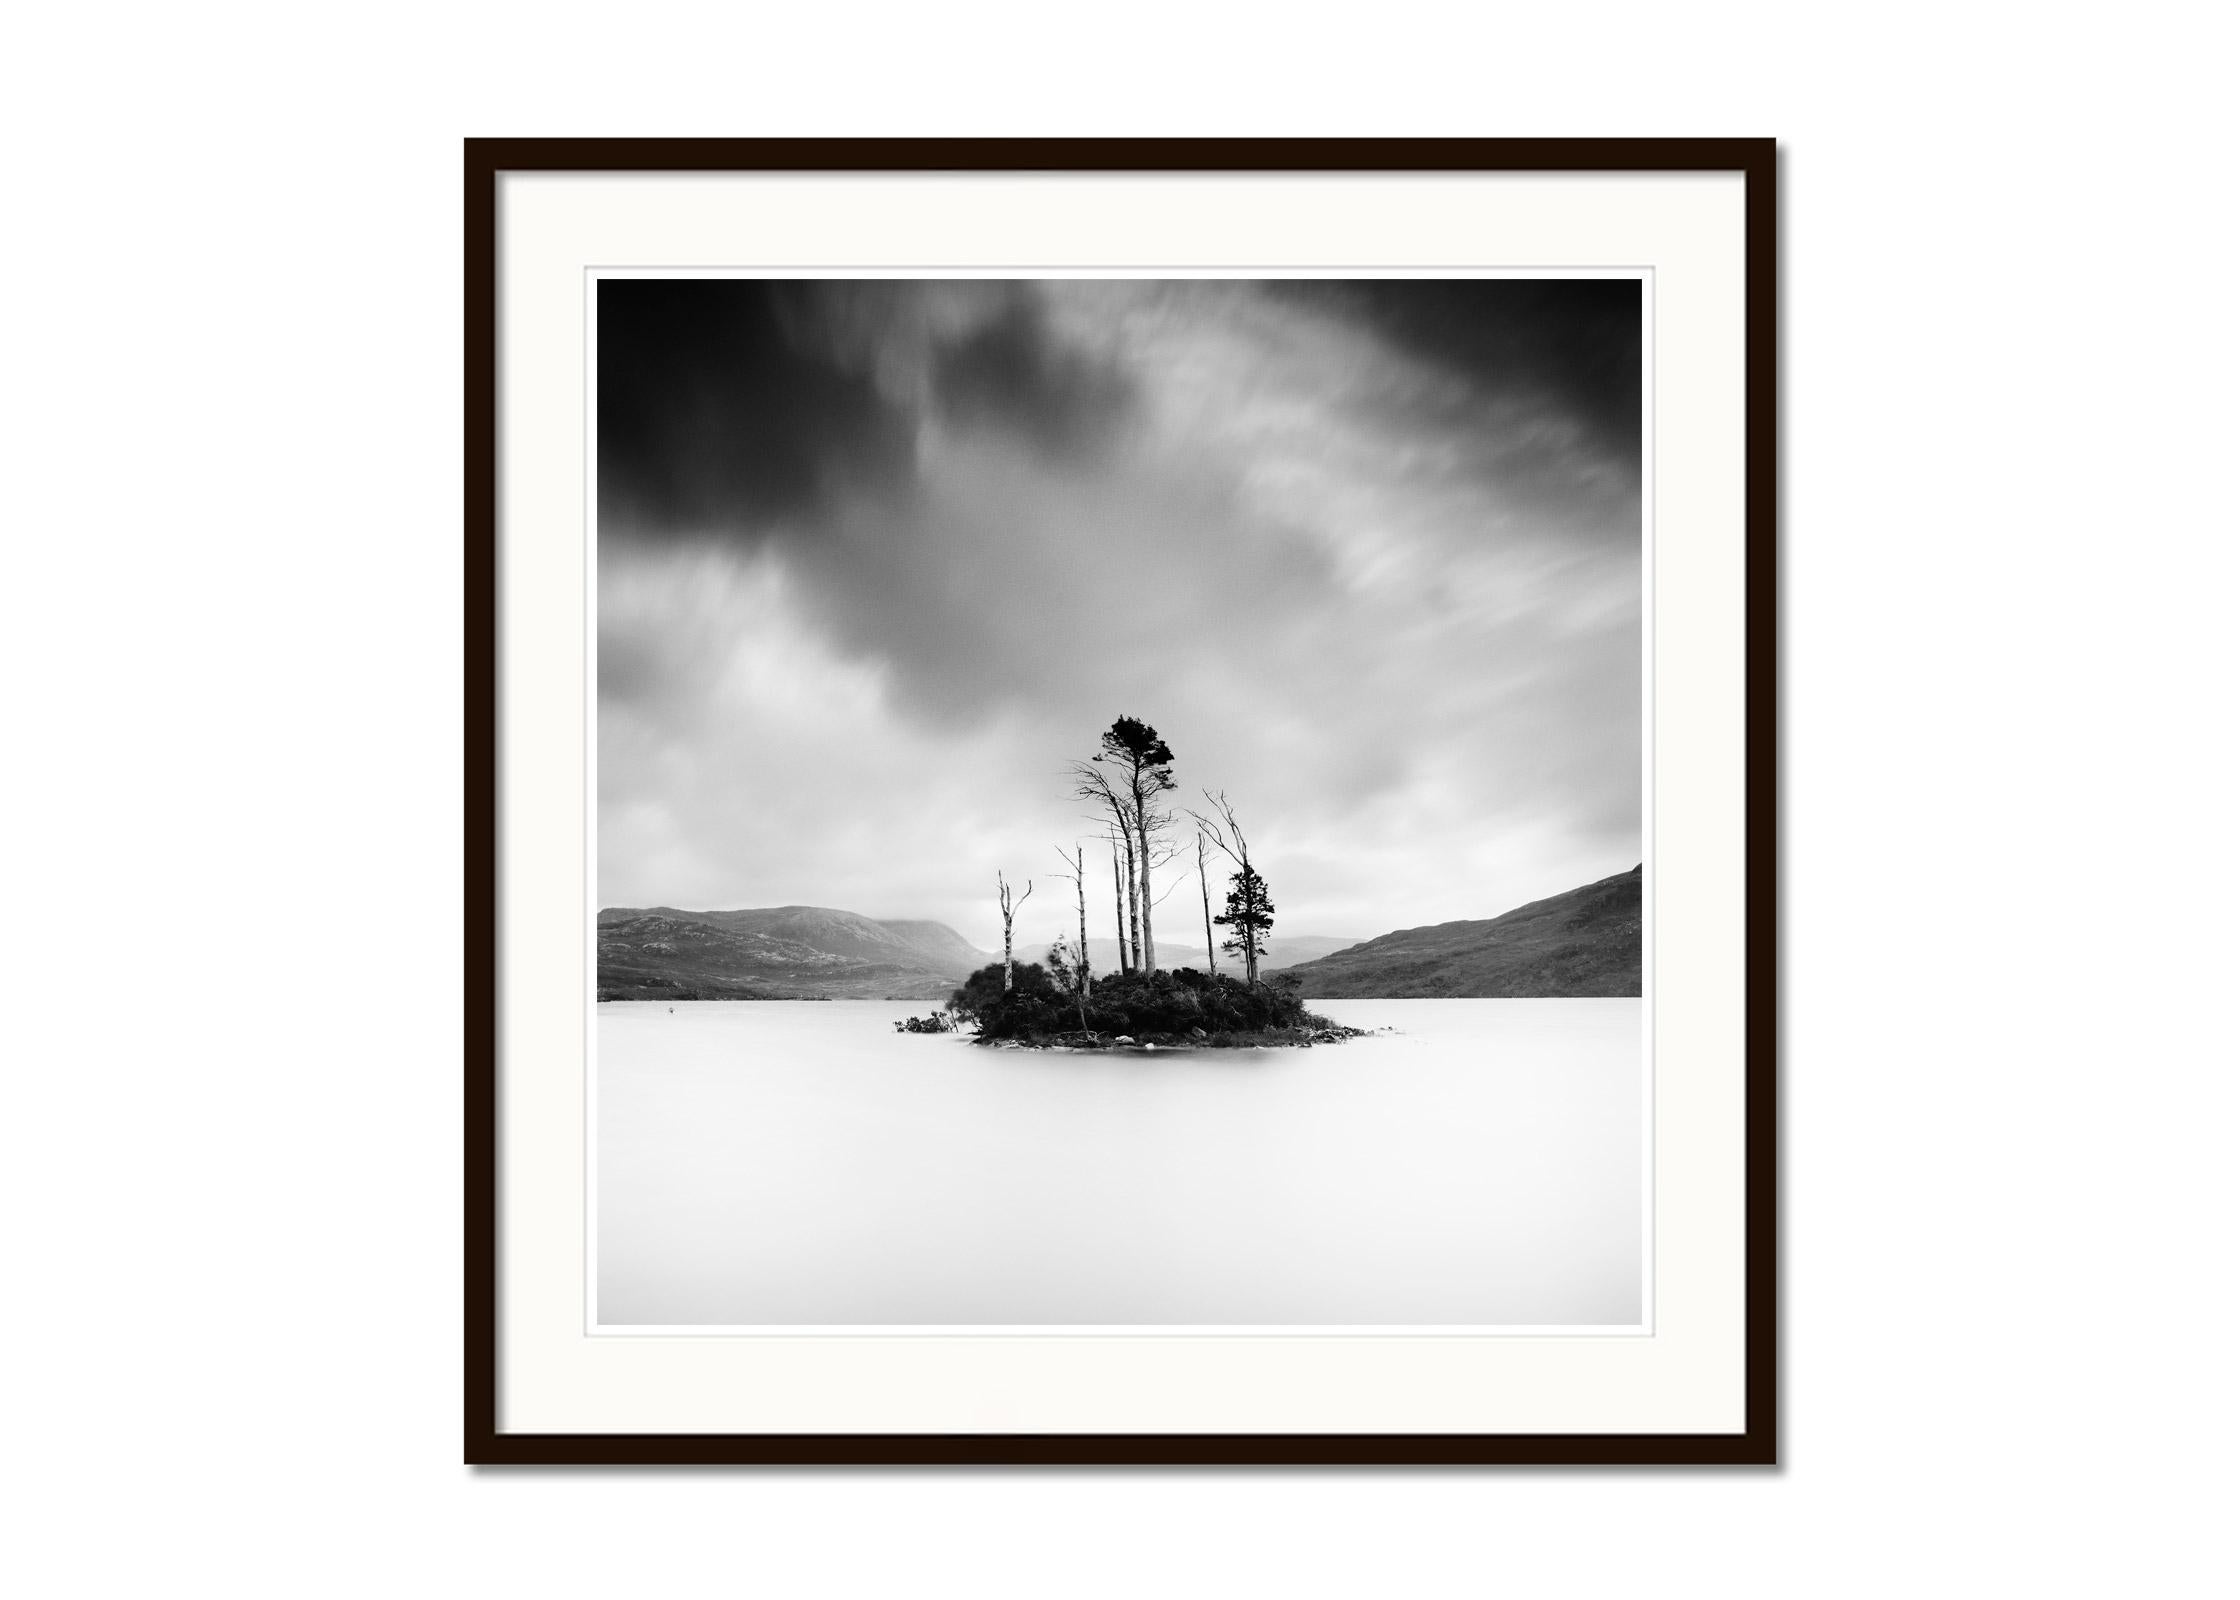 Black and white fine art long exposure waterscape - landscape photography print. Archival pigment ink print, edition of 15. Signed, titled, dated and numbered by artist. Certificate of authenticity included. Printed with 4cm white